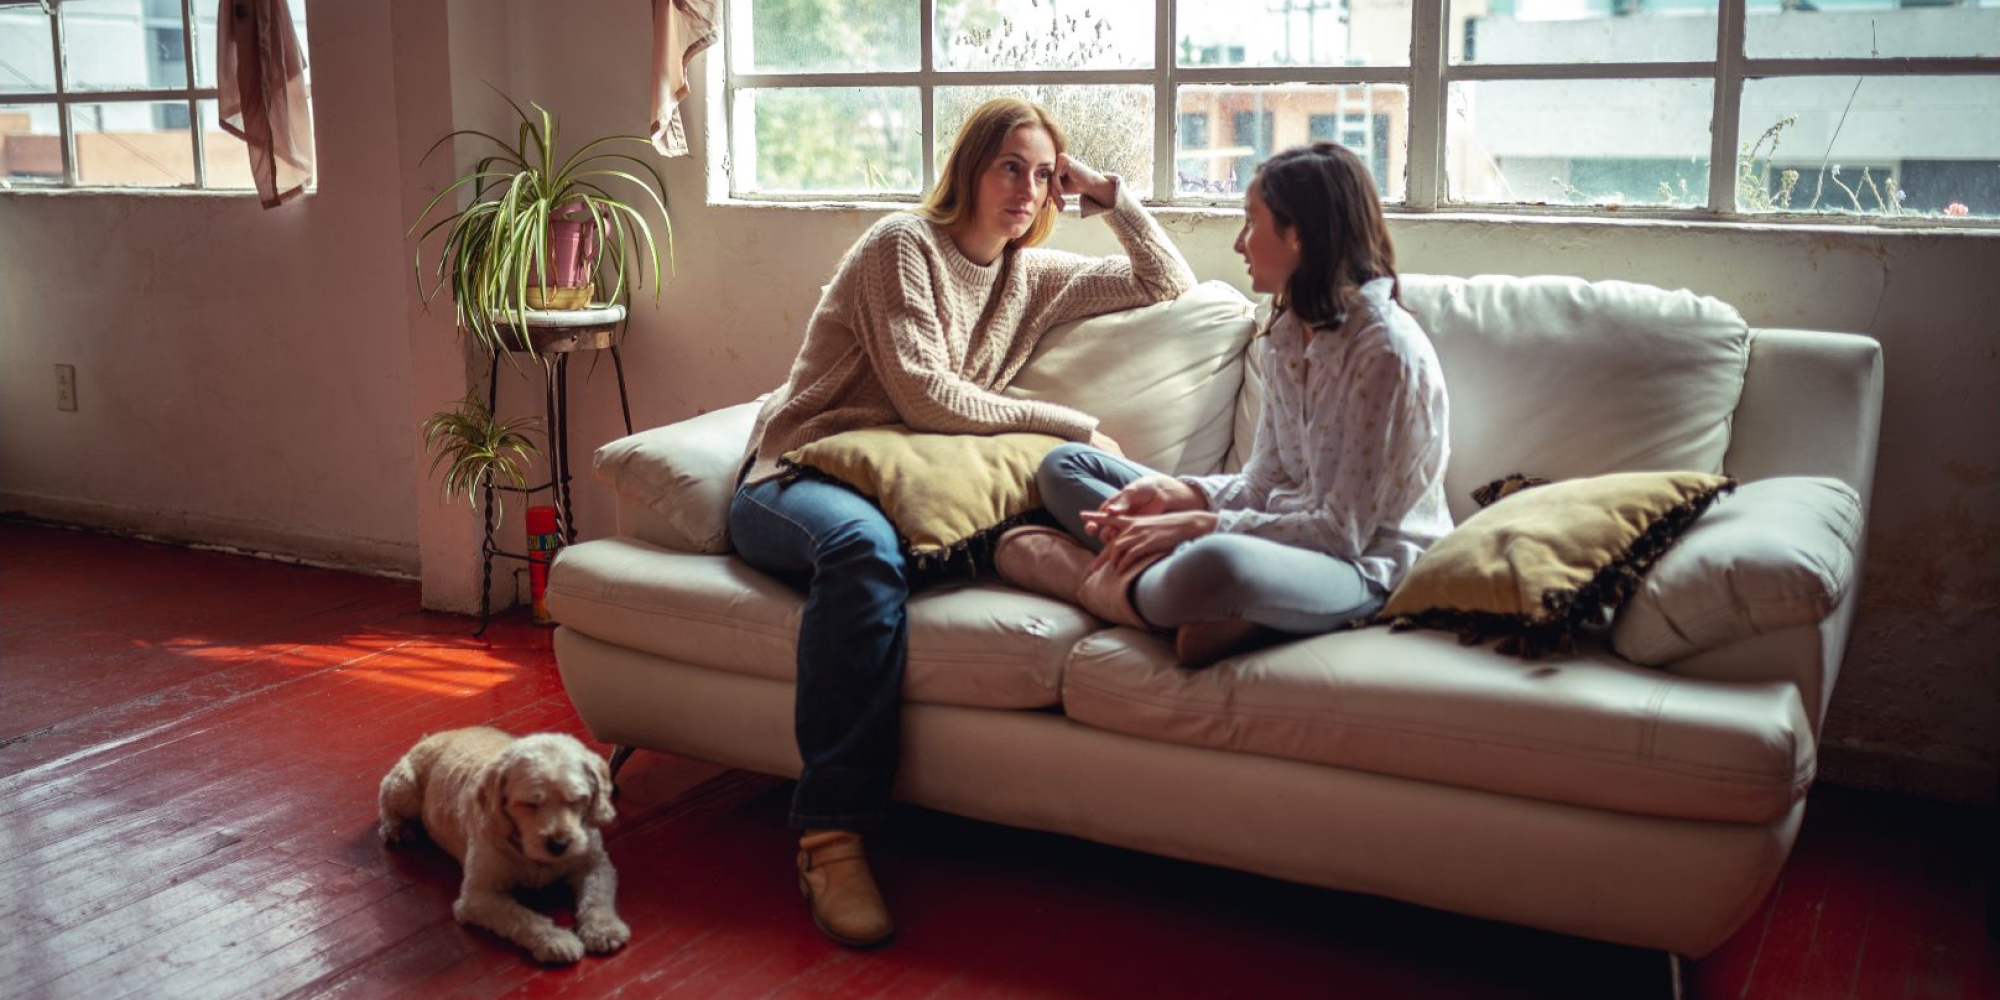 A mother and daughter sit. on a couch in front of windows. A dog sits on the floor in front of them. They look to be having a serious conversation.